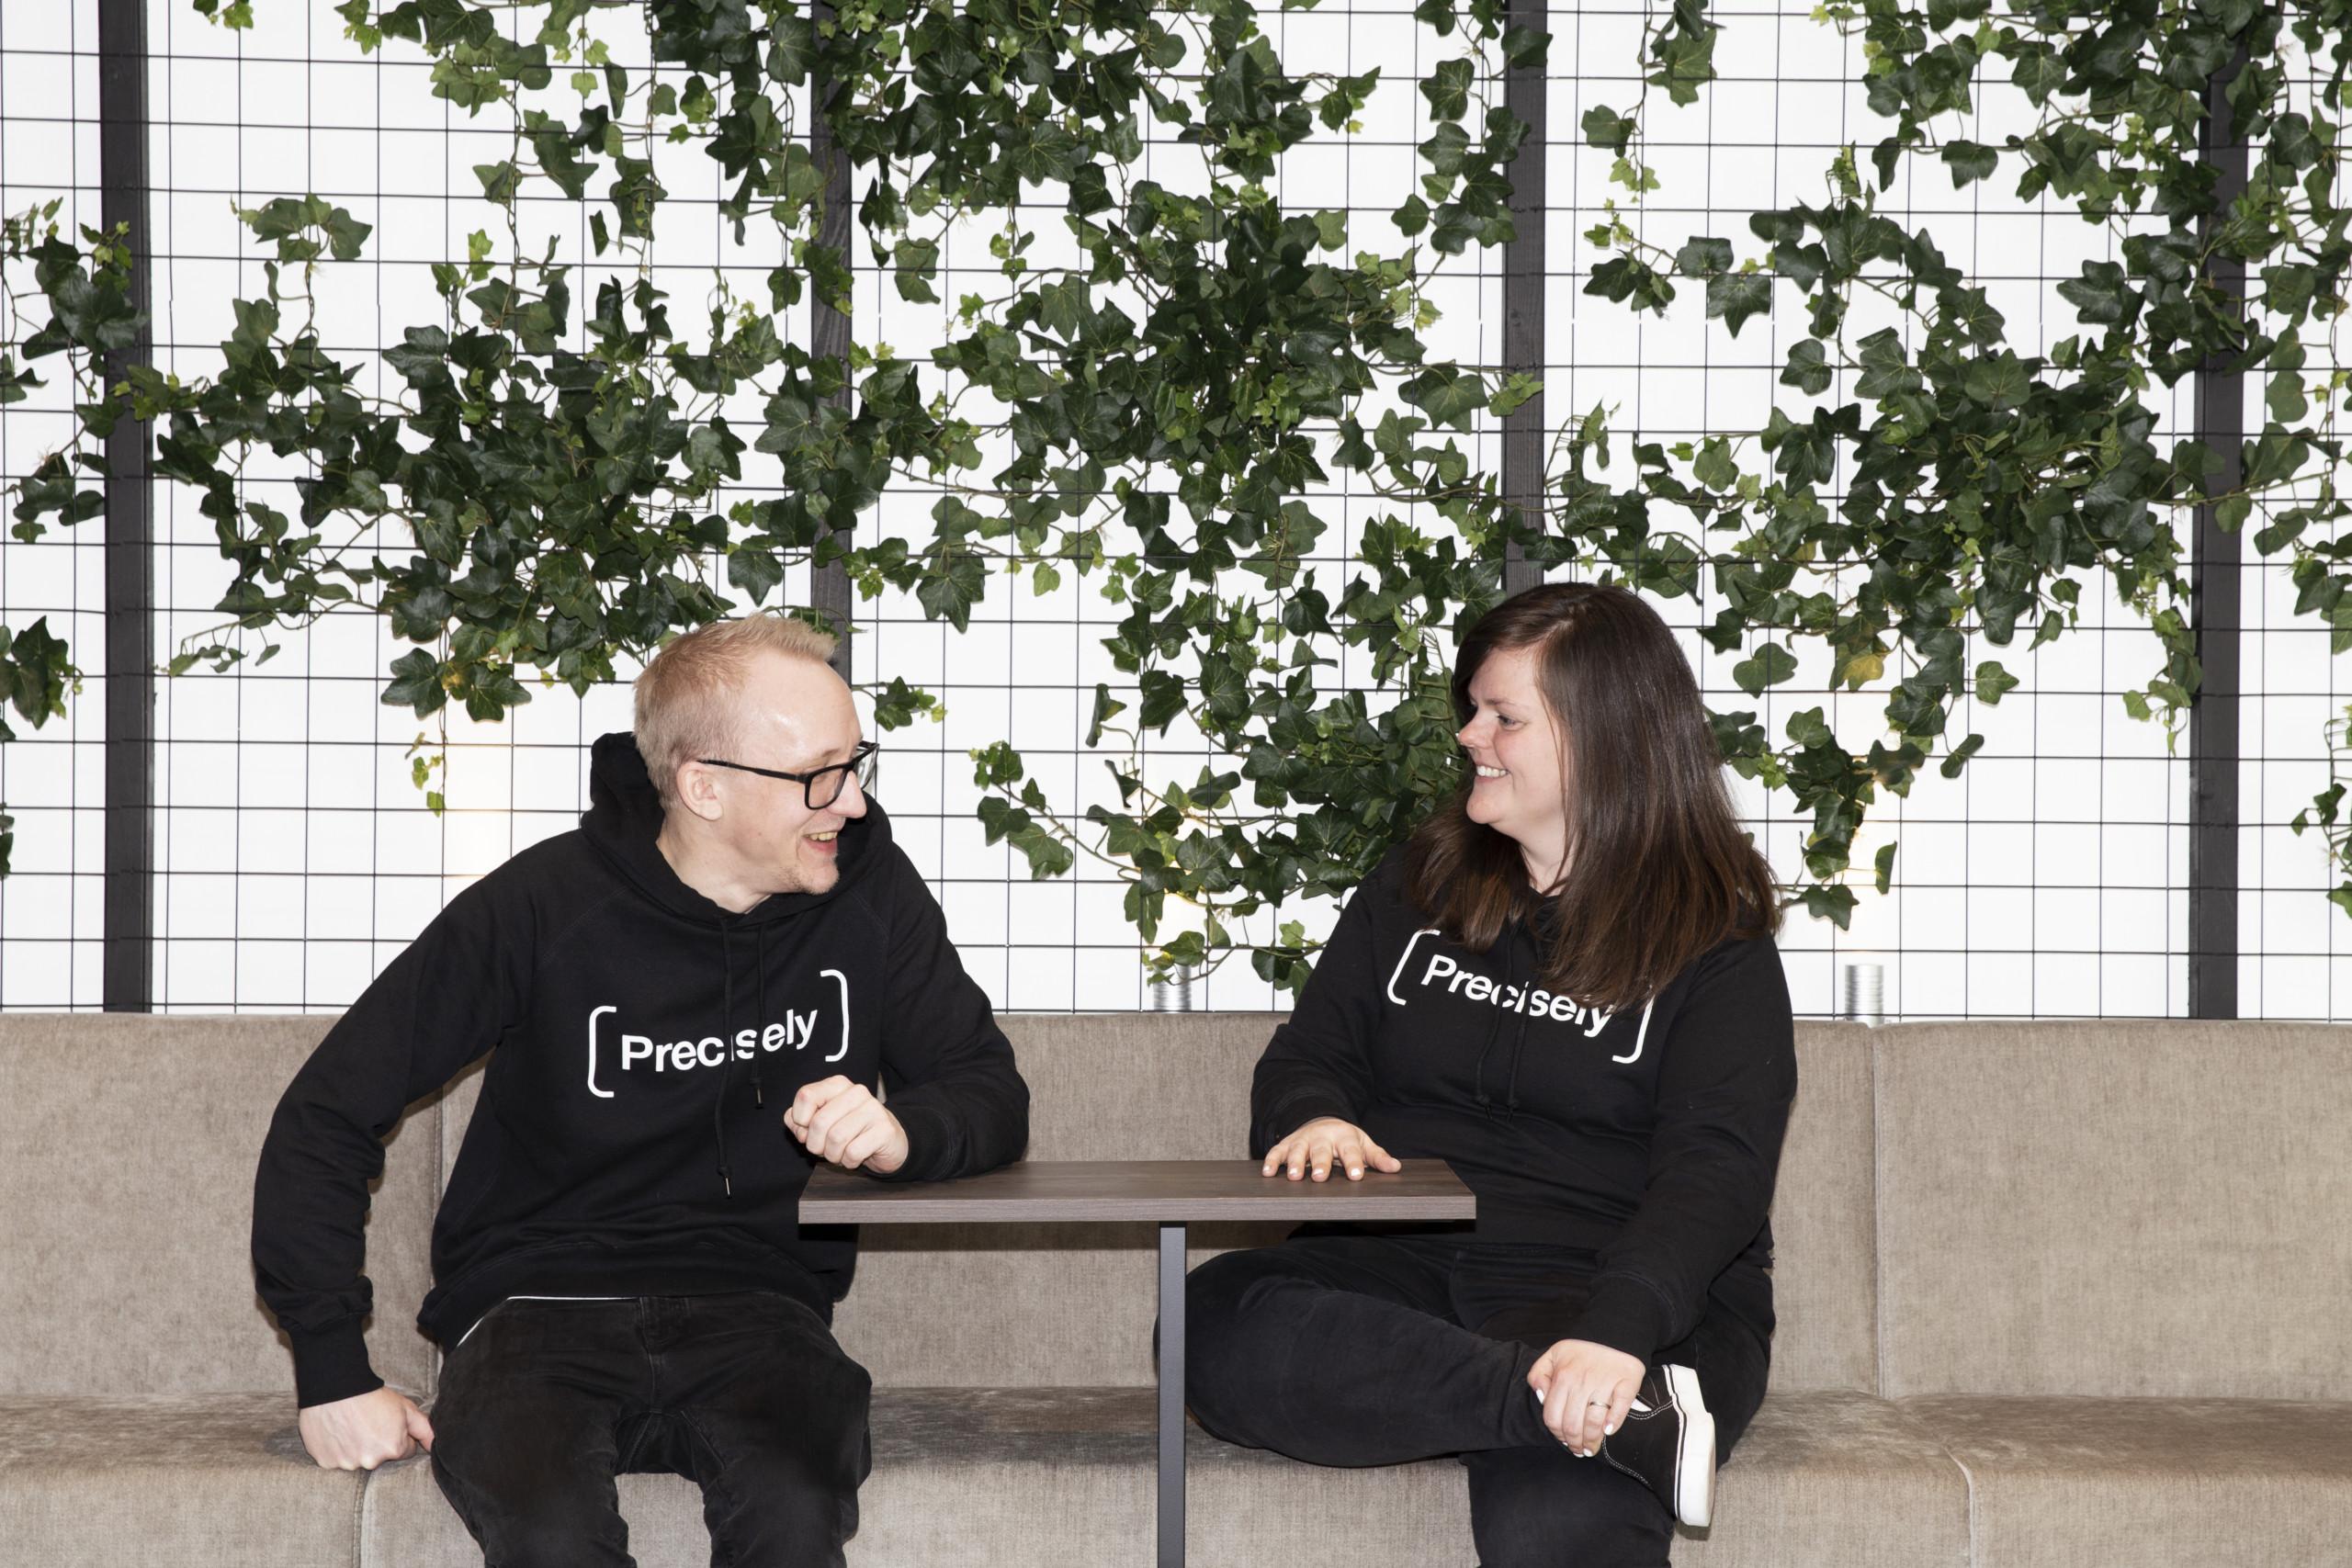 Two happy people sitting in front of a plant wall wearing black hoodies with Precisely logos